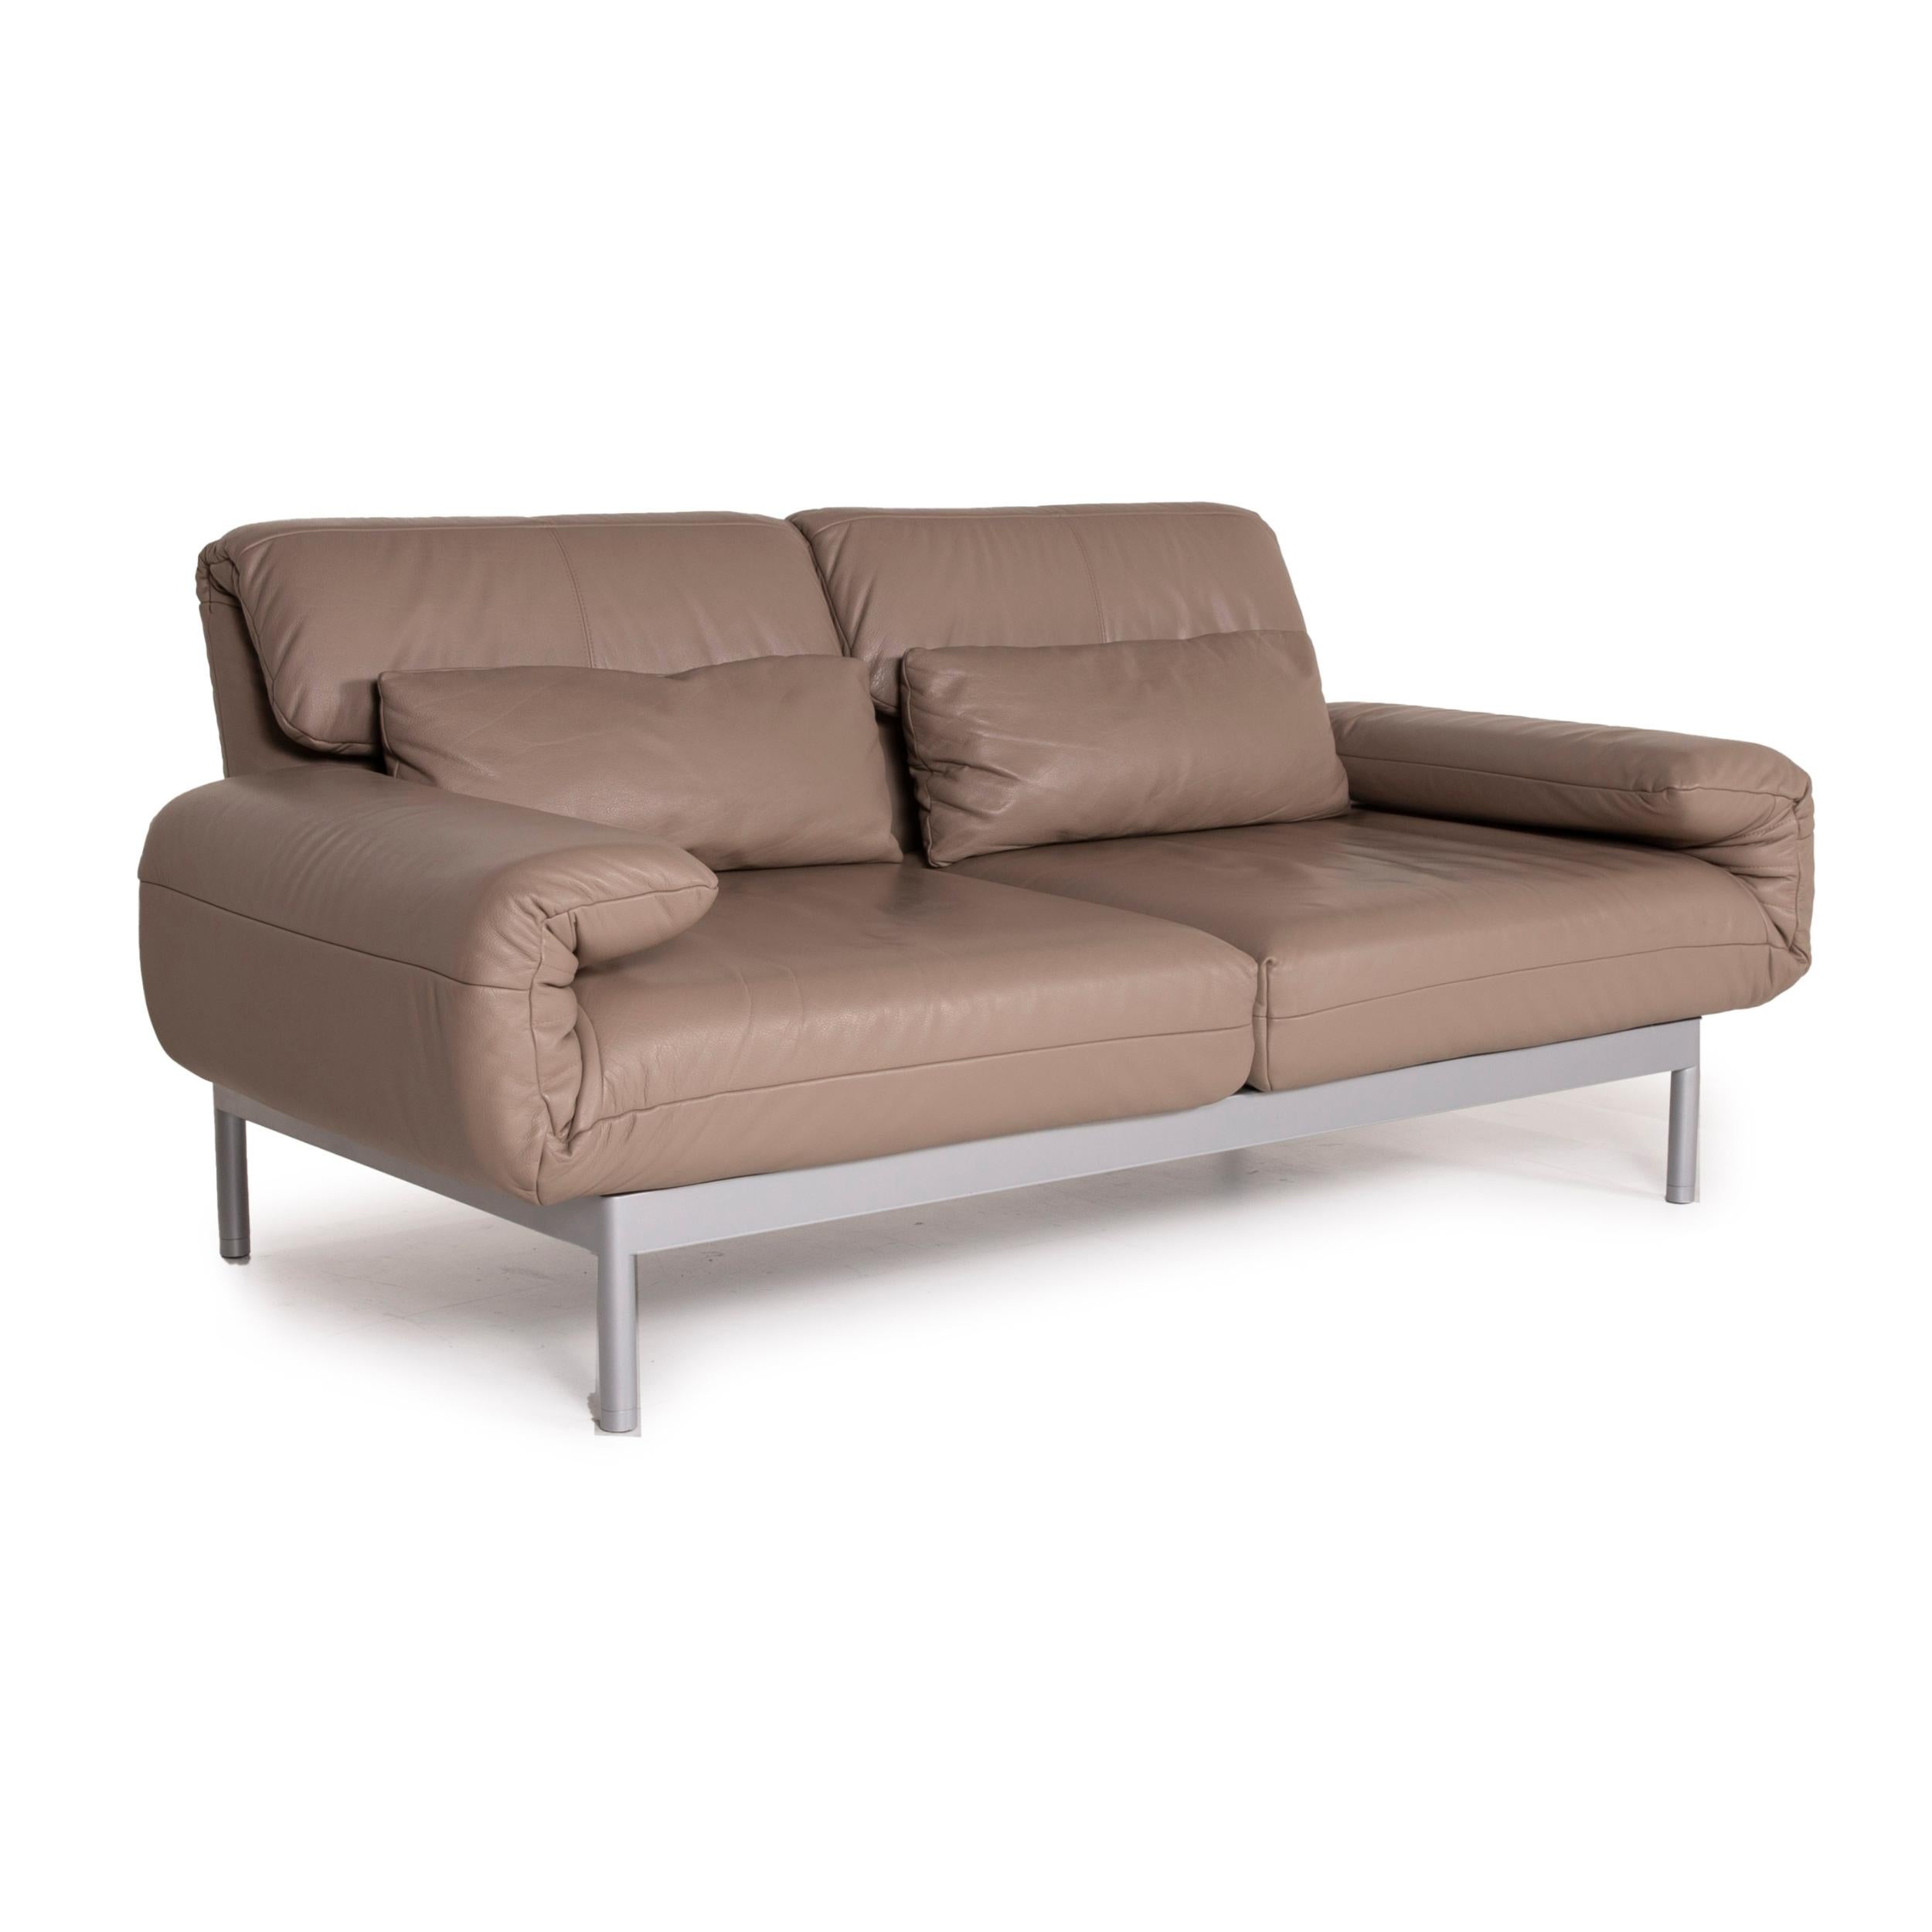 Rolf Benz Plura Leather Sofa Brown Two-Seater Function Reclining Function 1